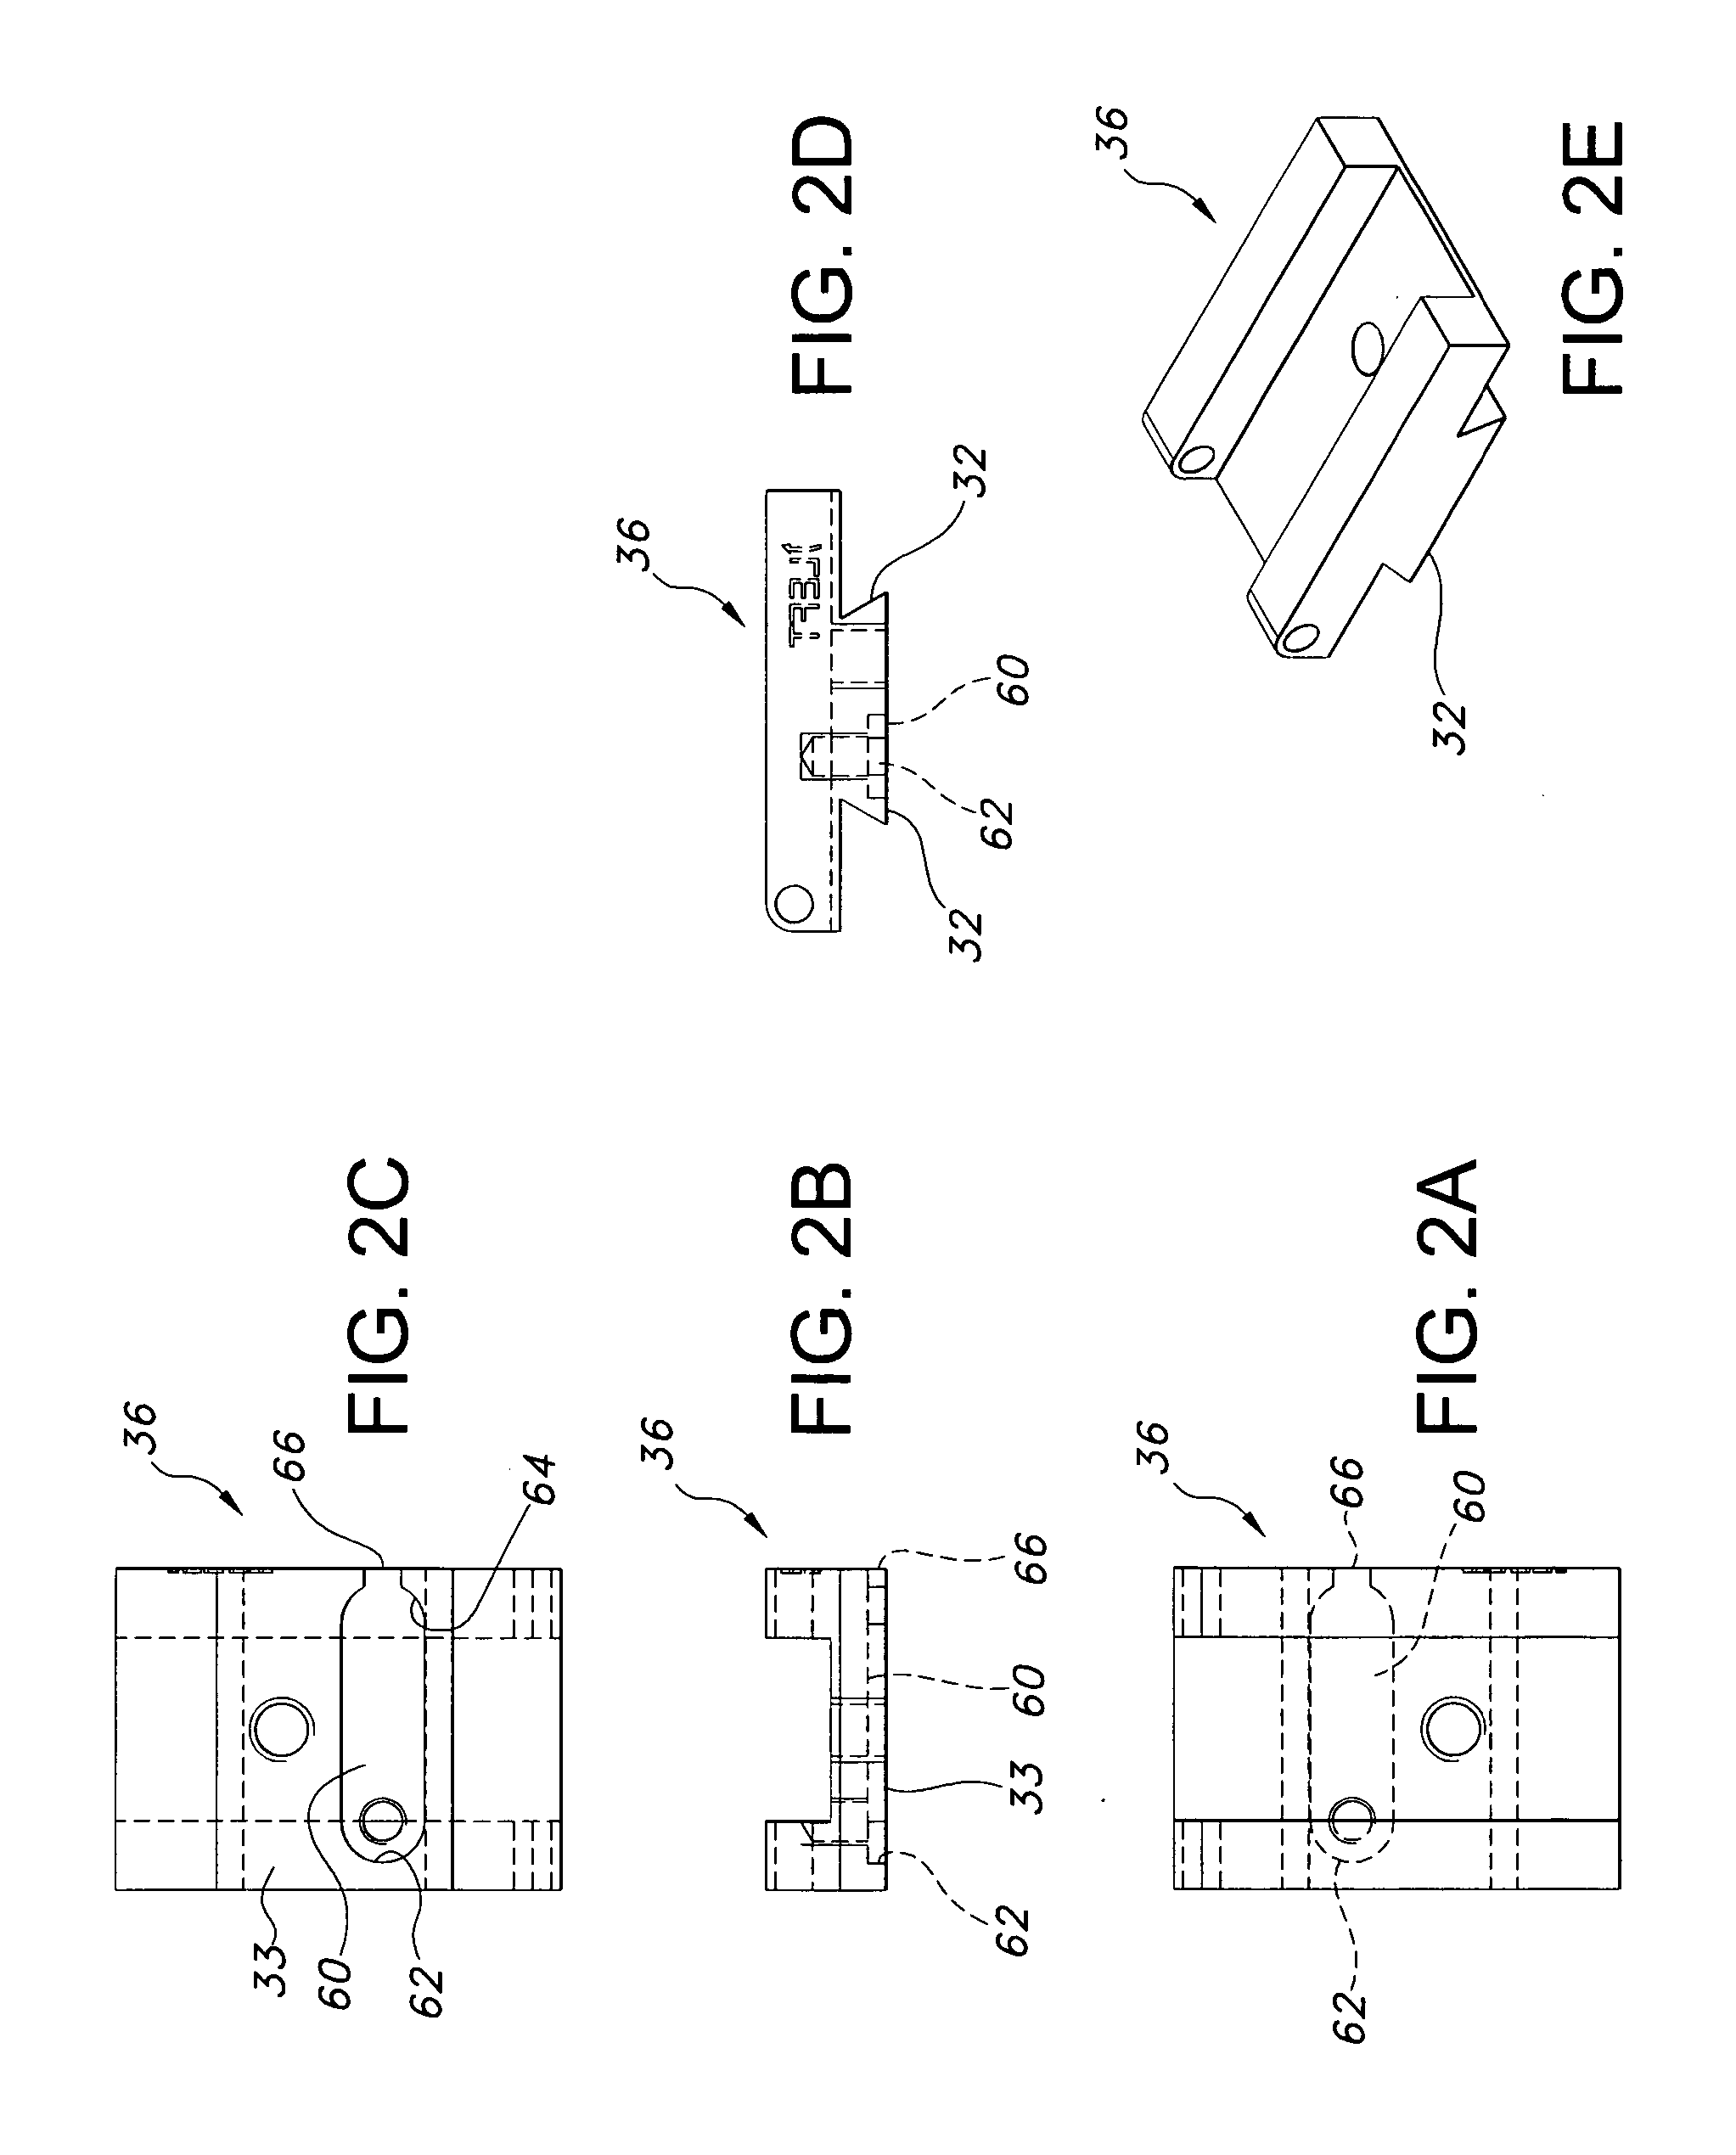 Interchangeable sight system and method for removably mounting an optical alignment apparatus